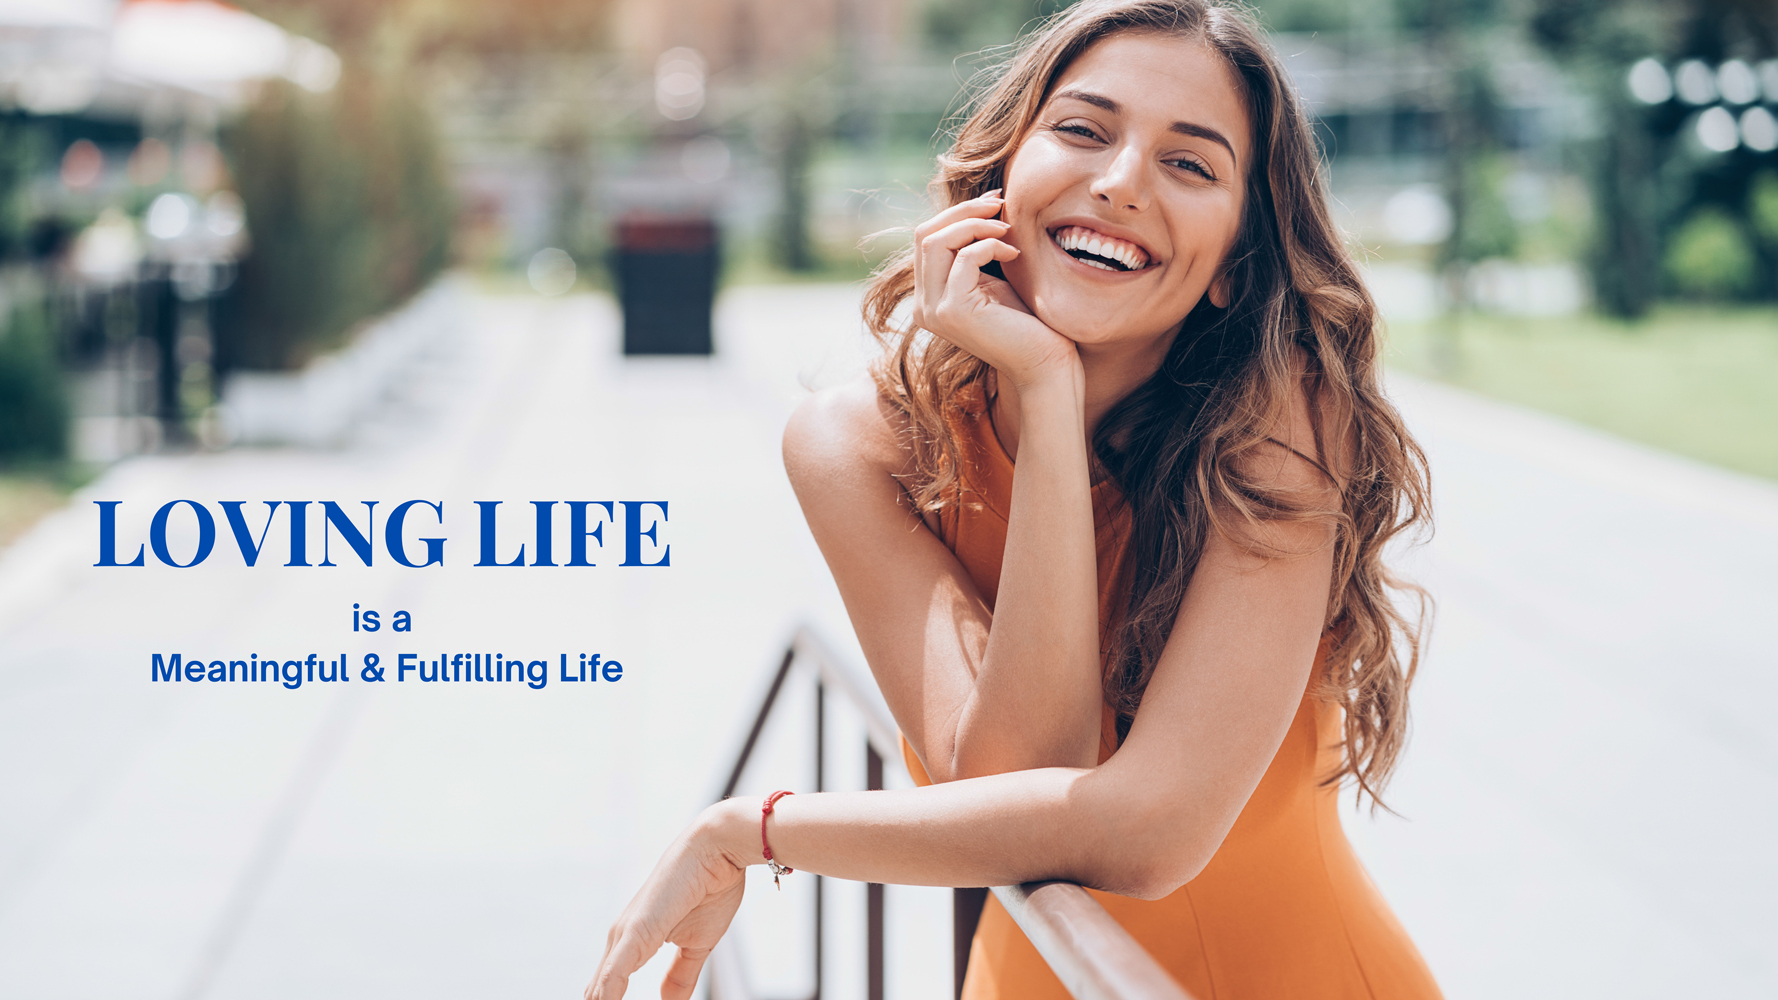 Loving Life by achieving greater life fulfillment with Healing Programs in Ontario